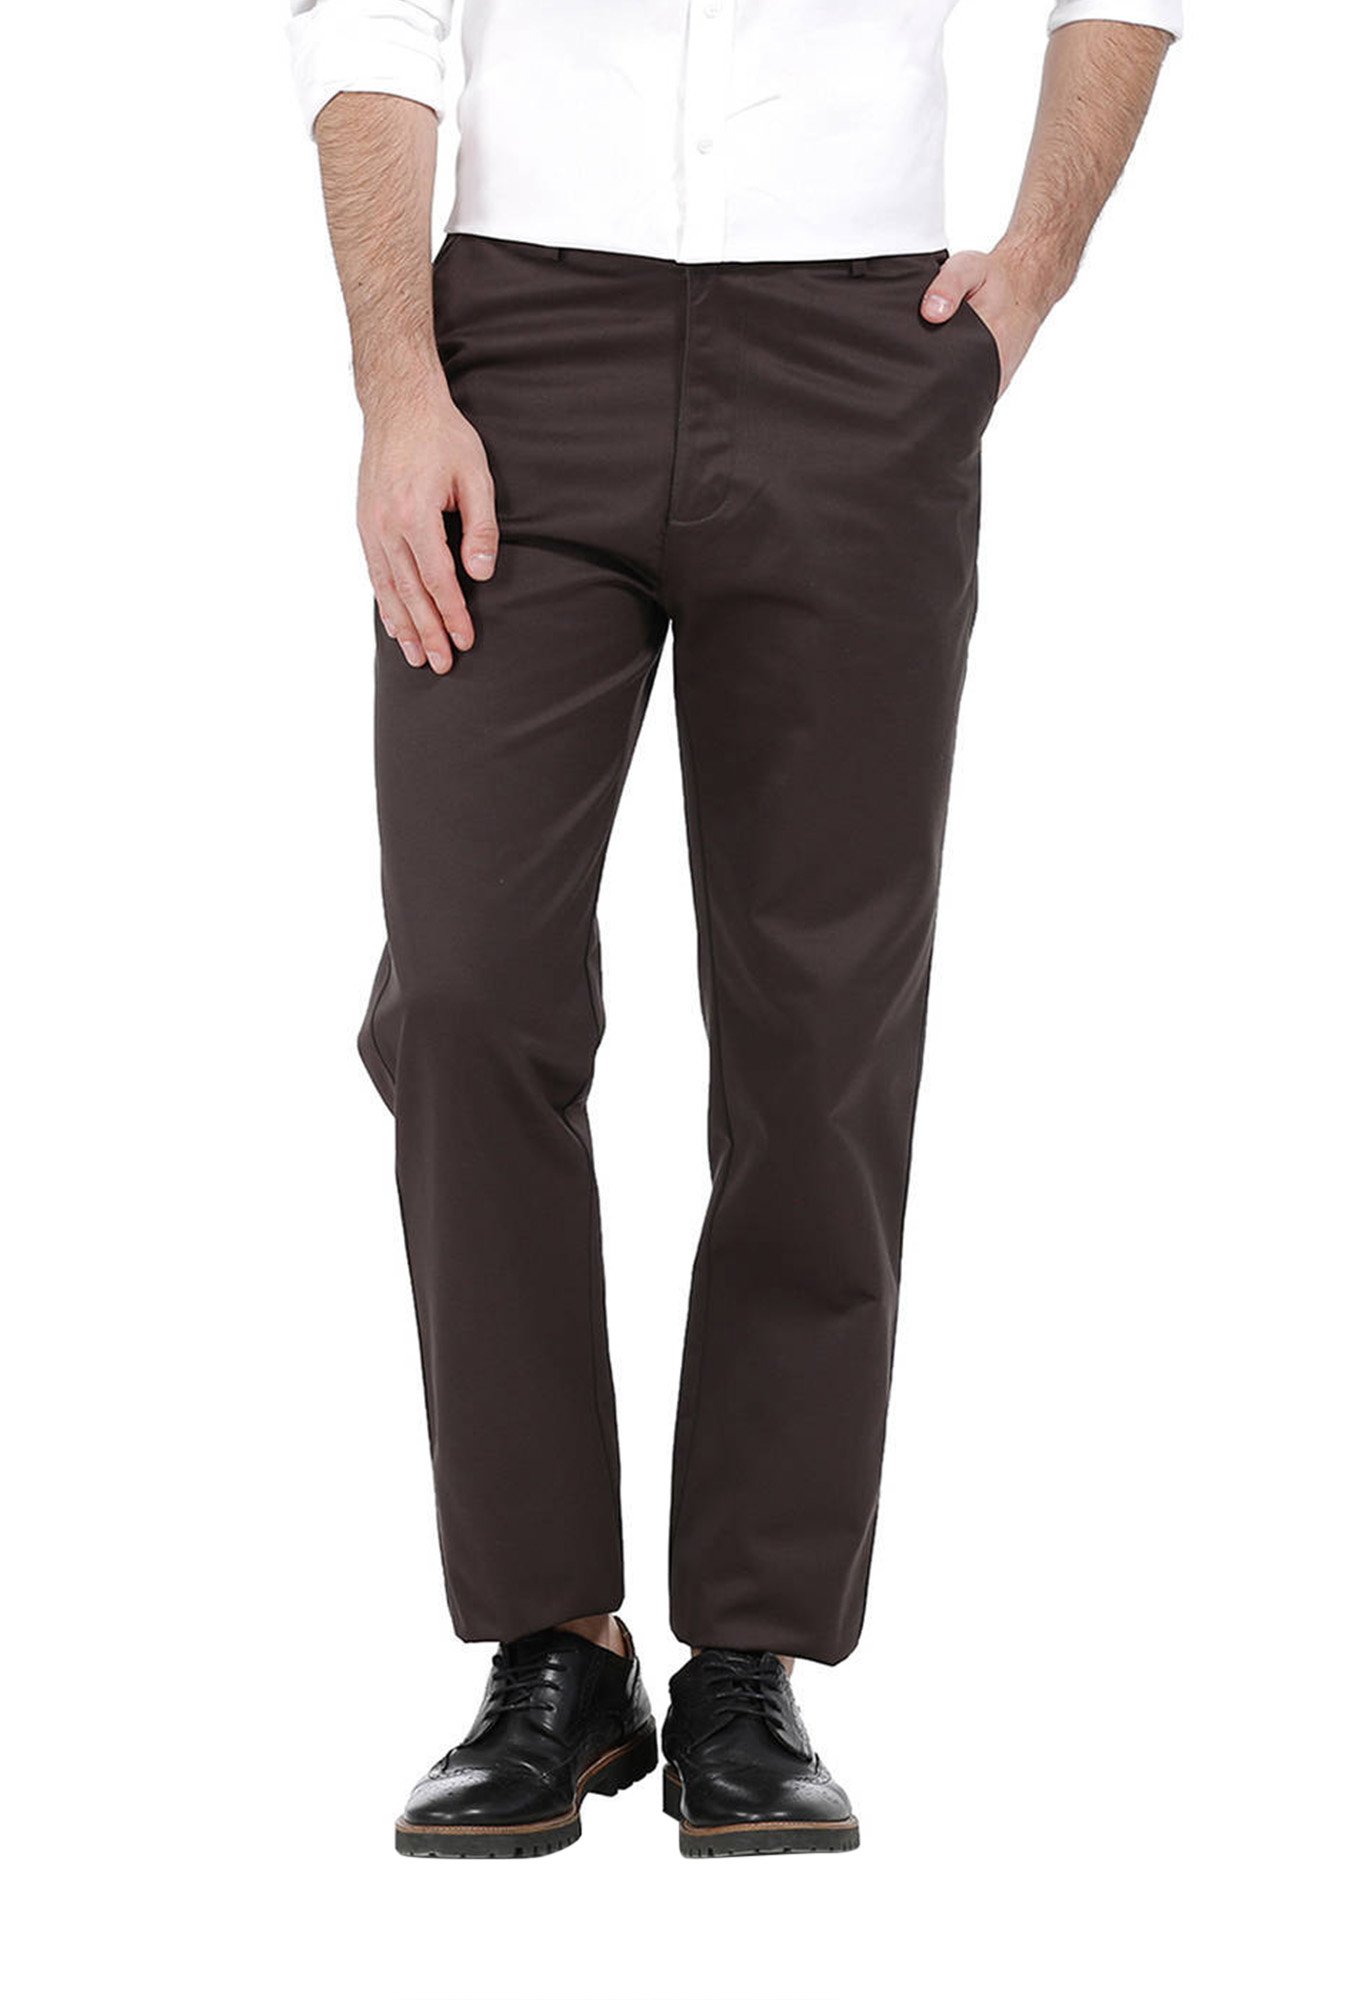 BASICS Casual Trousers  Buy BASICS Grey Solid Casual Trouser Online   Nykaa Fashion